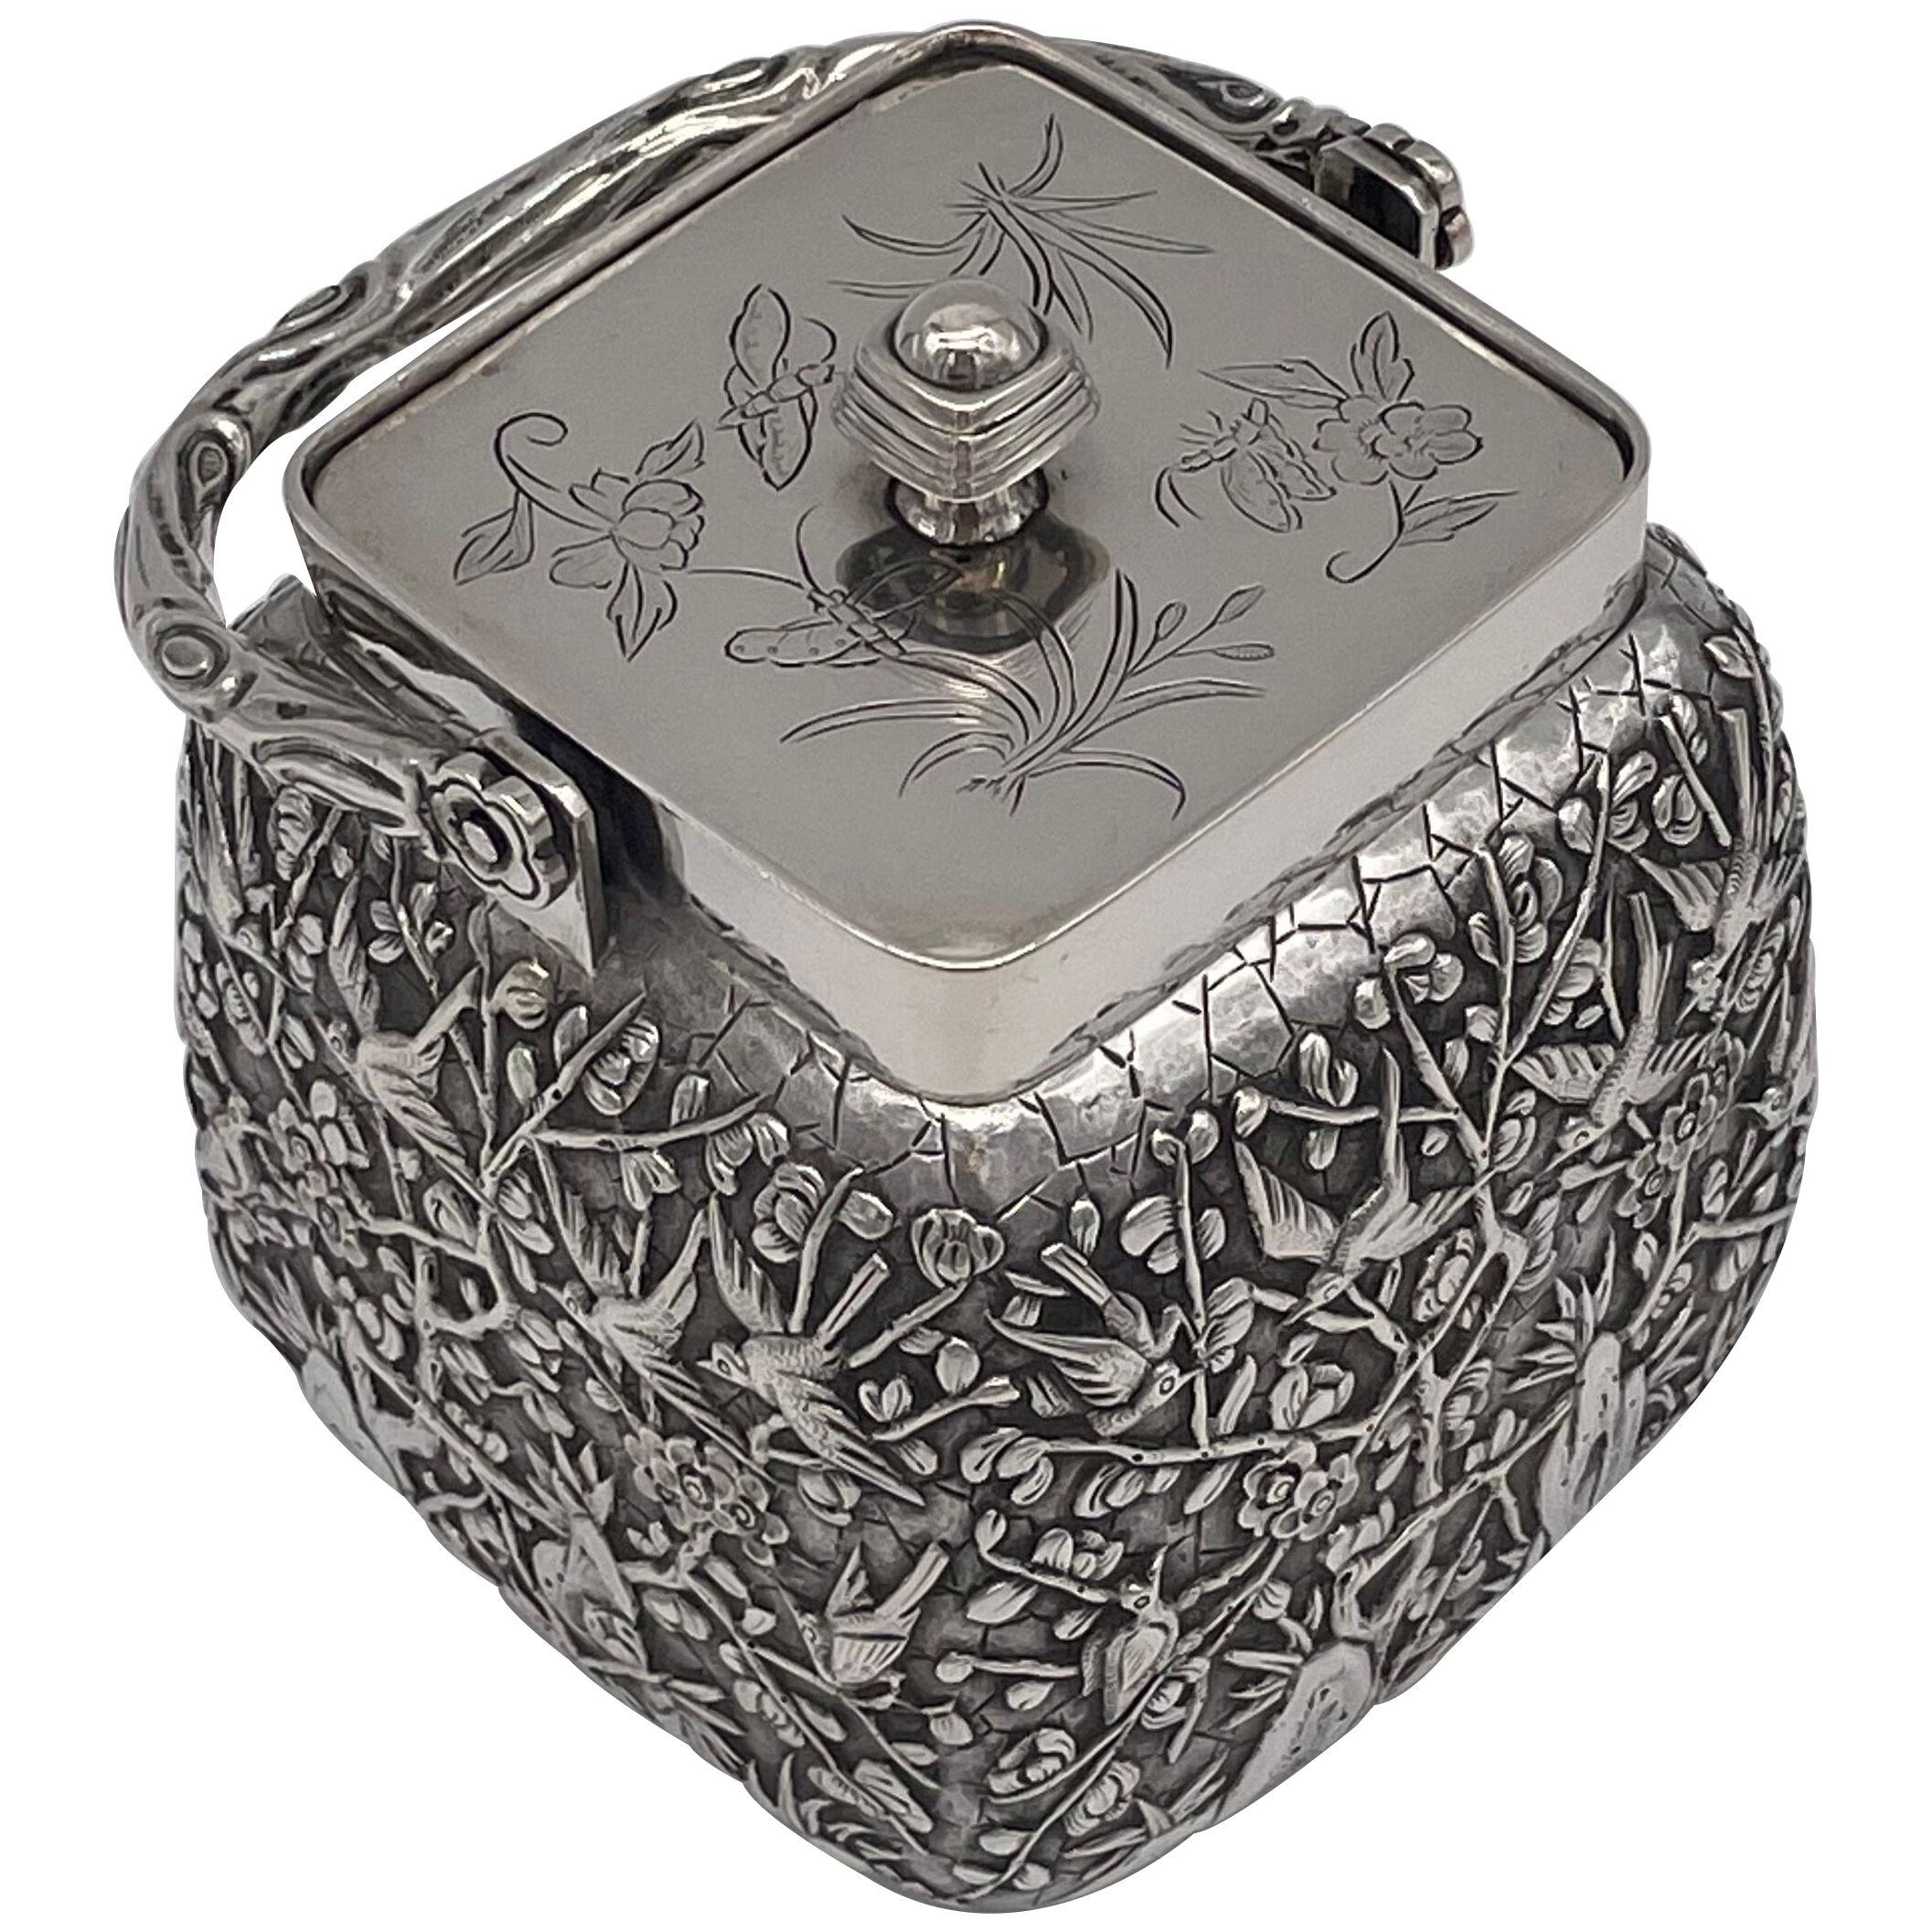 Chinese Export Silver Preserve jar